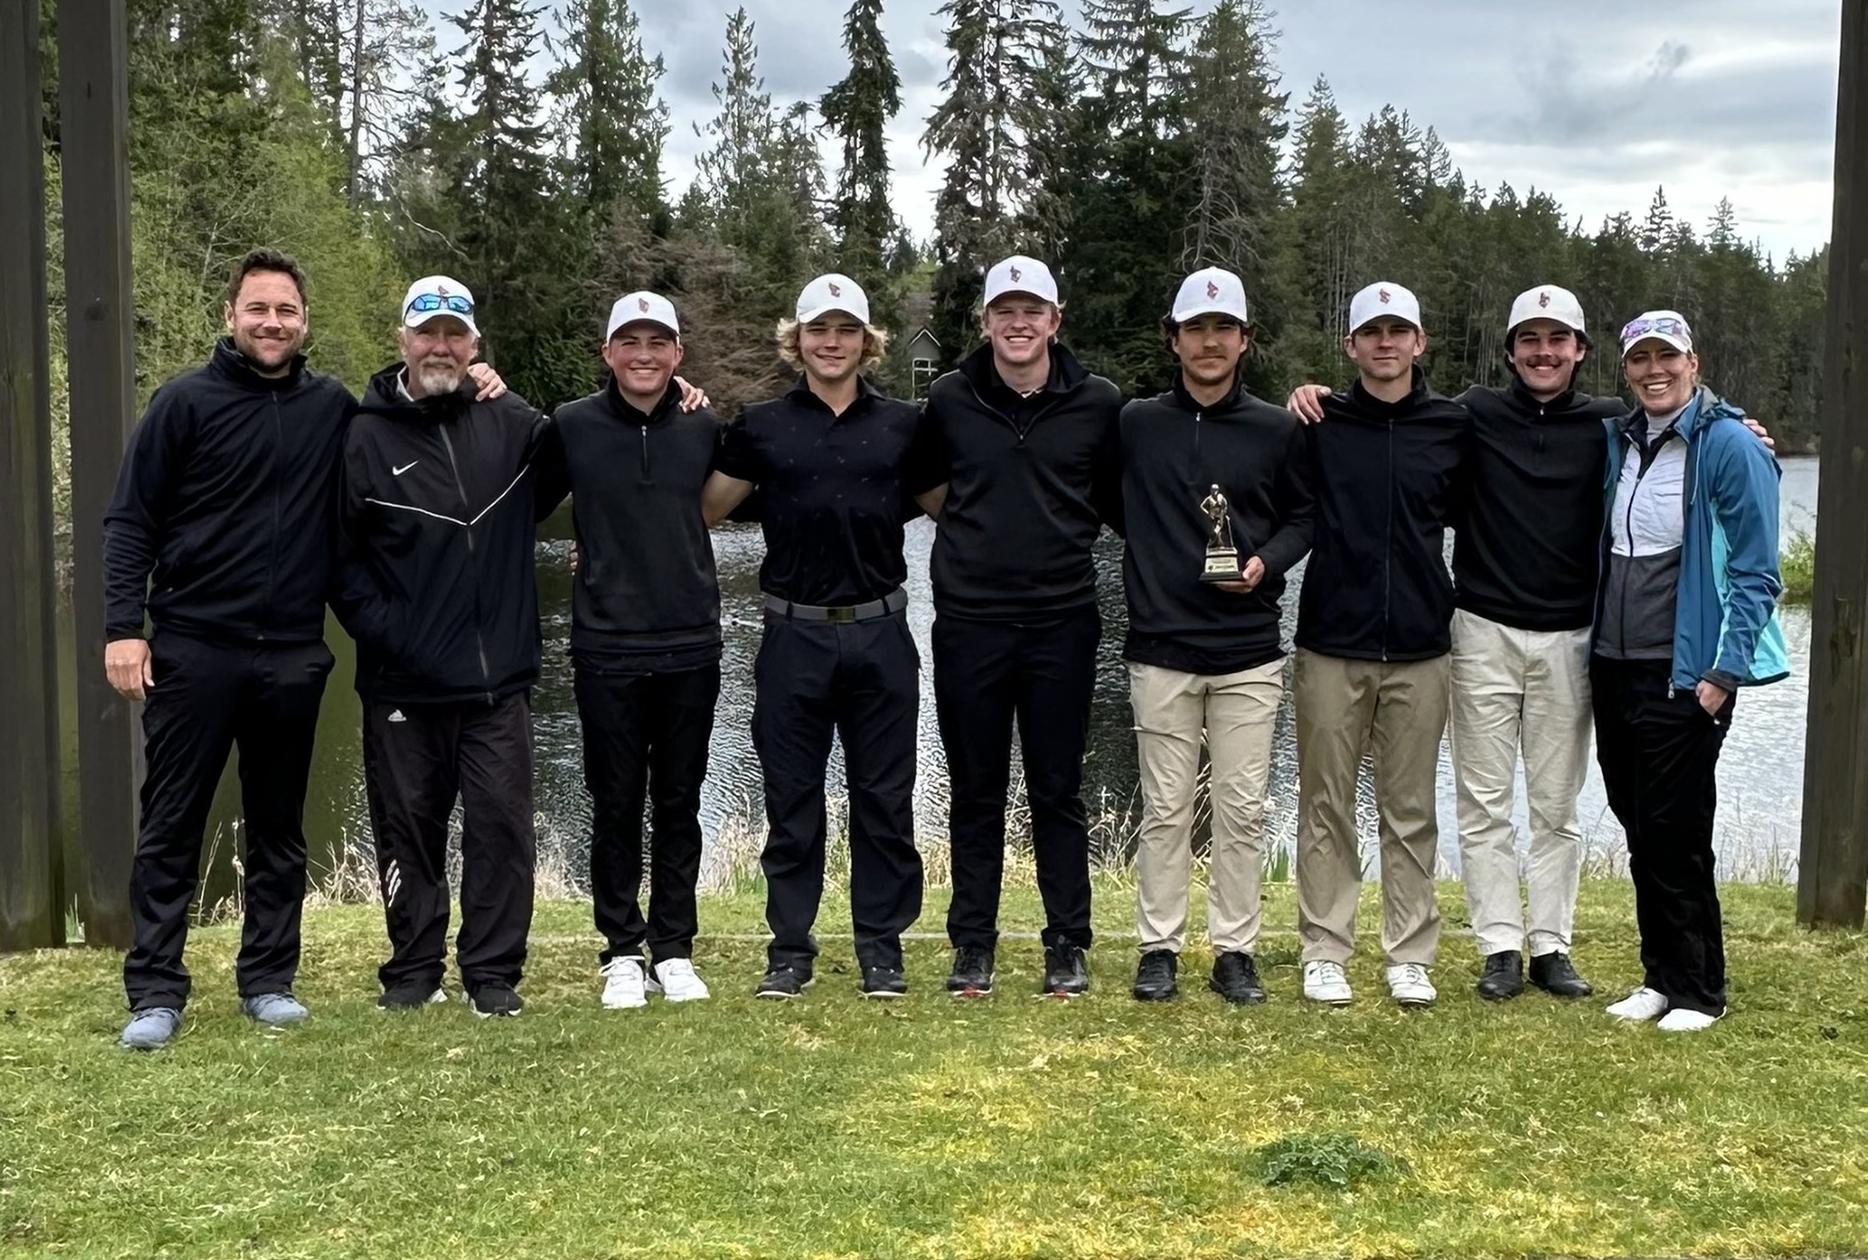 The North Idaho College men's golf team won the Olympic Invitational on Monday in Port Orchard, Wash. From left are head coach Russell Grove, volunteer coach Russ Grove, Dyson Lish, Ferdinand Le Grange, Quinn Abbott, Jarett Giles, Spence Matson, Josh McCartain and assistant coach Brittany Pounds.